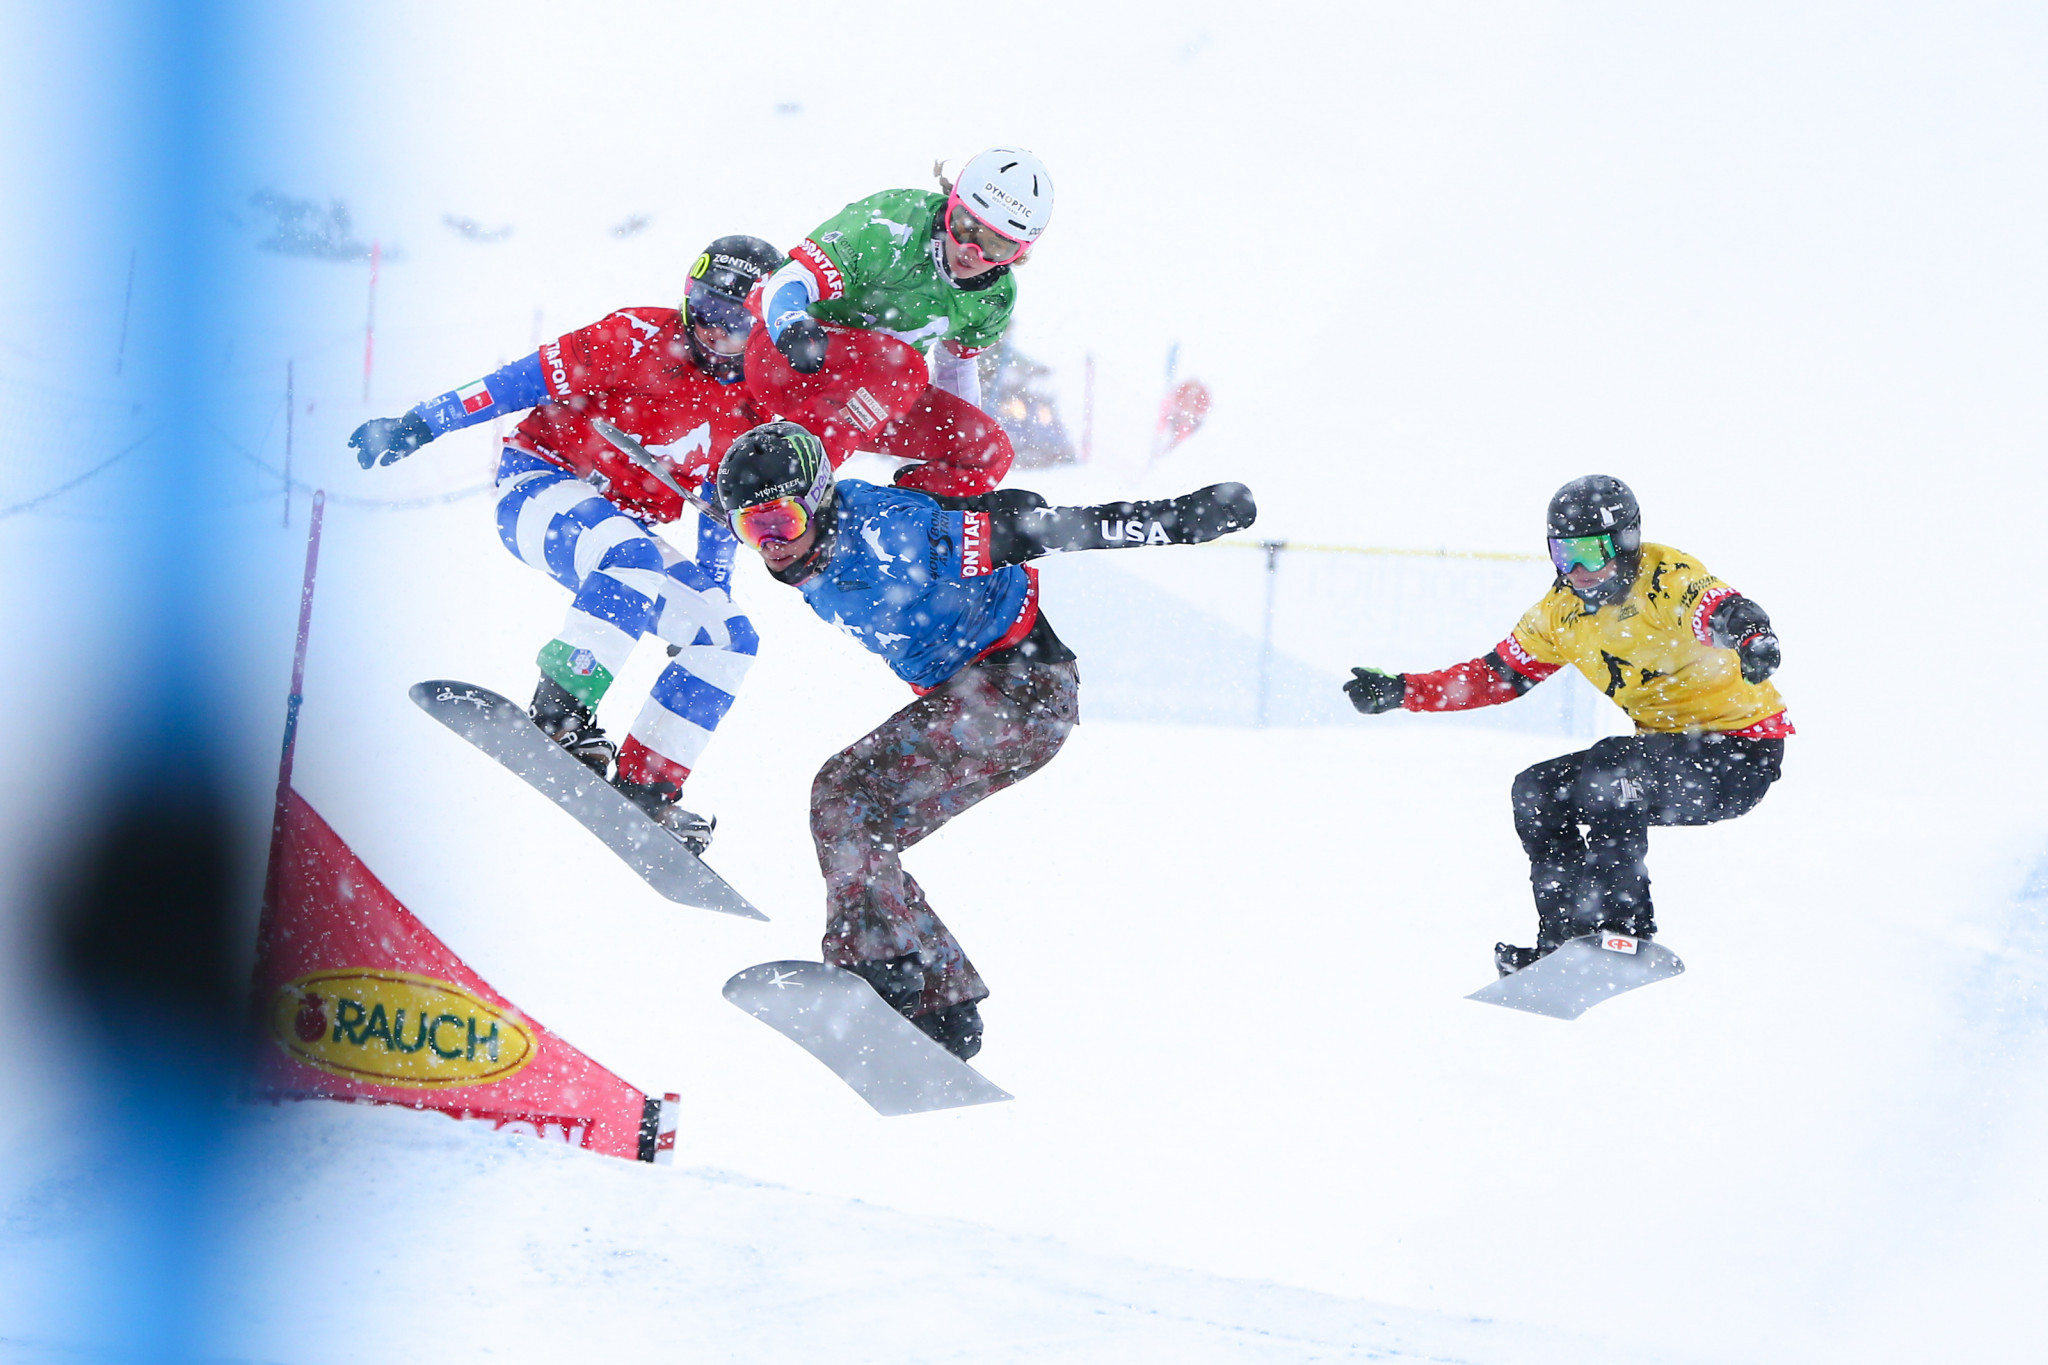 Moioli and Visintin take the spoils in Cervinia at FIS Snowboard Cross World Cup